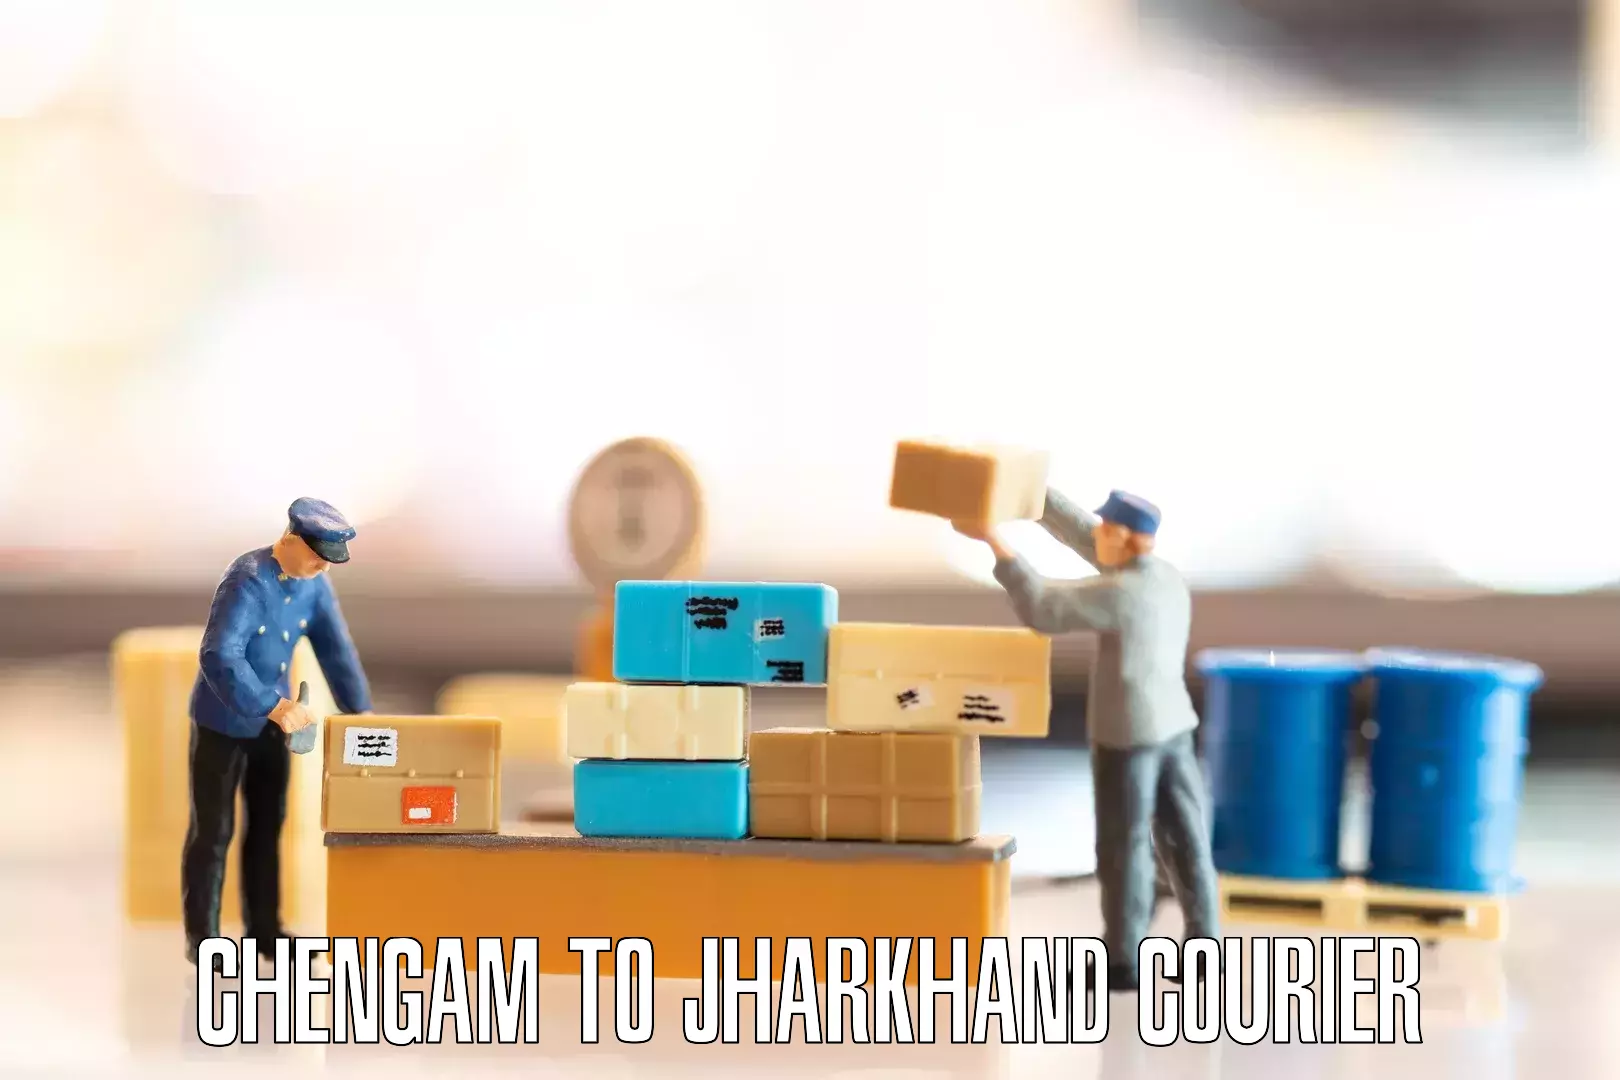 Furniture transport experts Chengam to Jharkhand